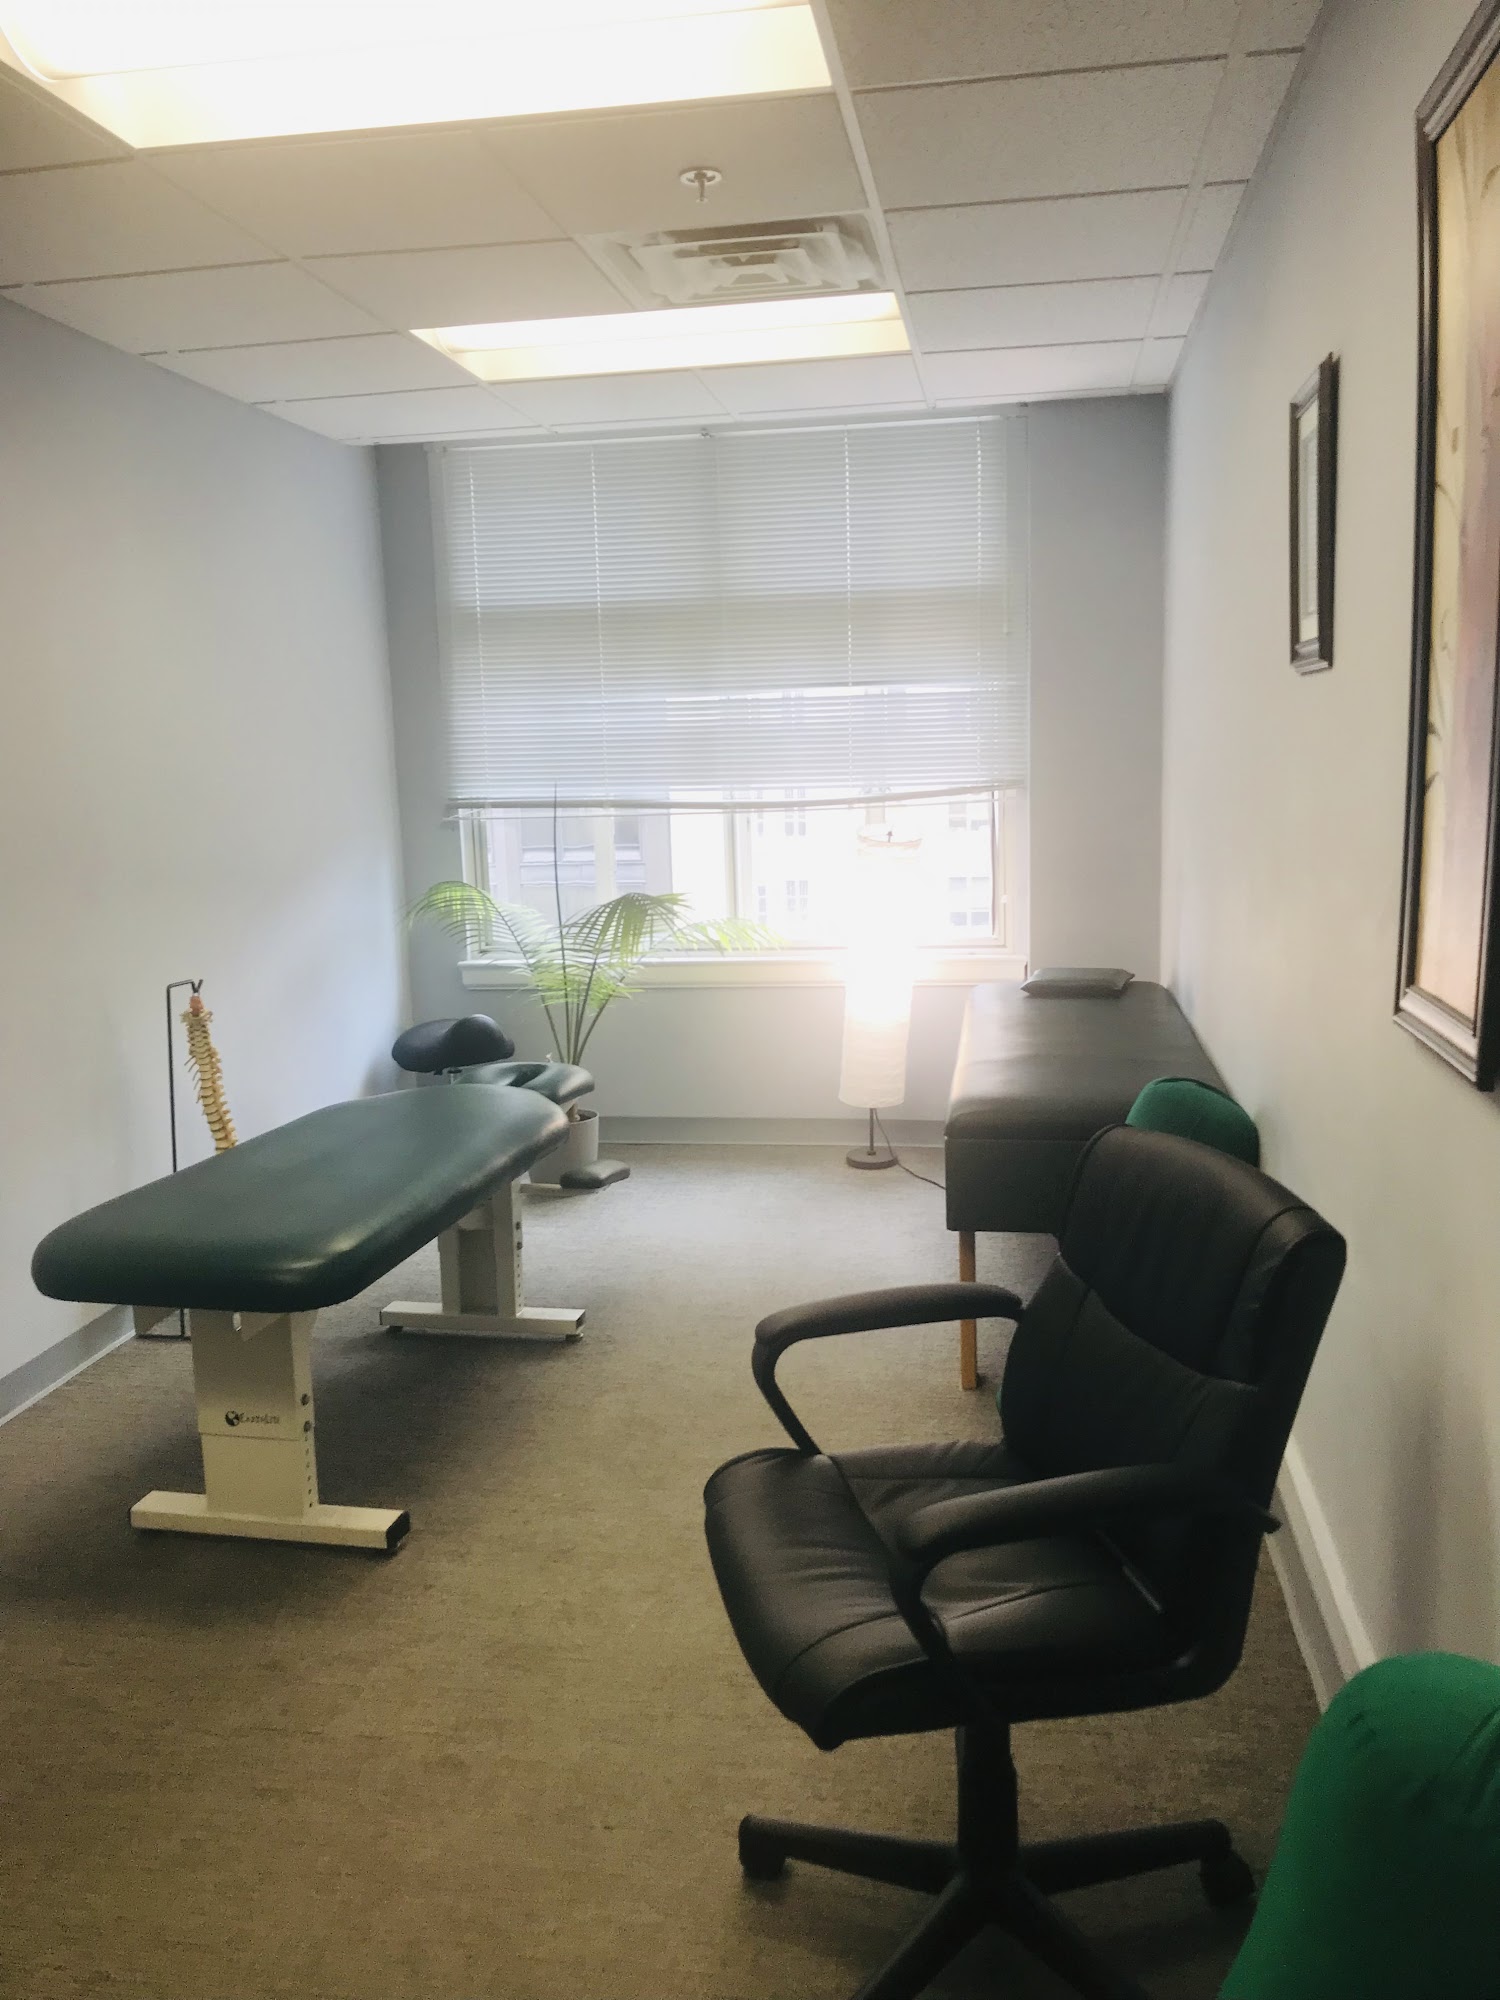 Dr. Paul Rubin's Chiropractic and Wellness Center